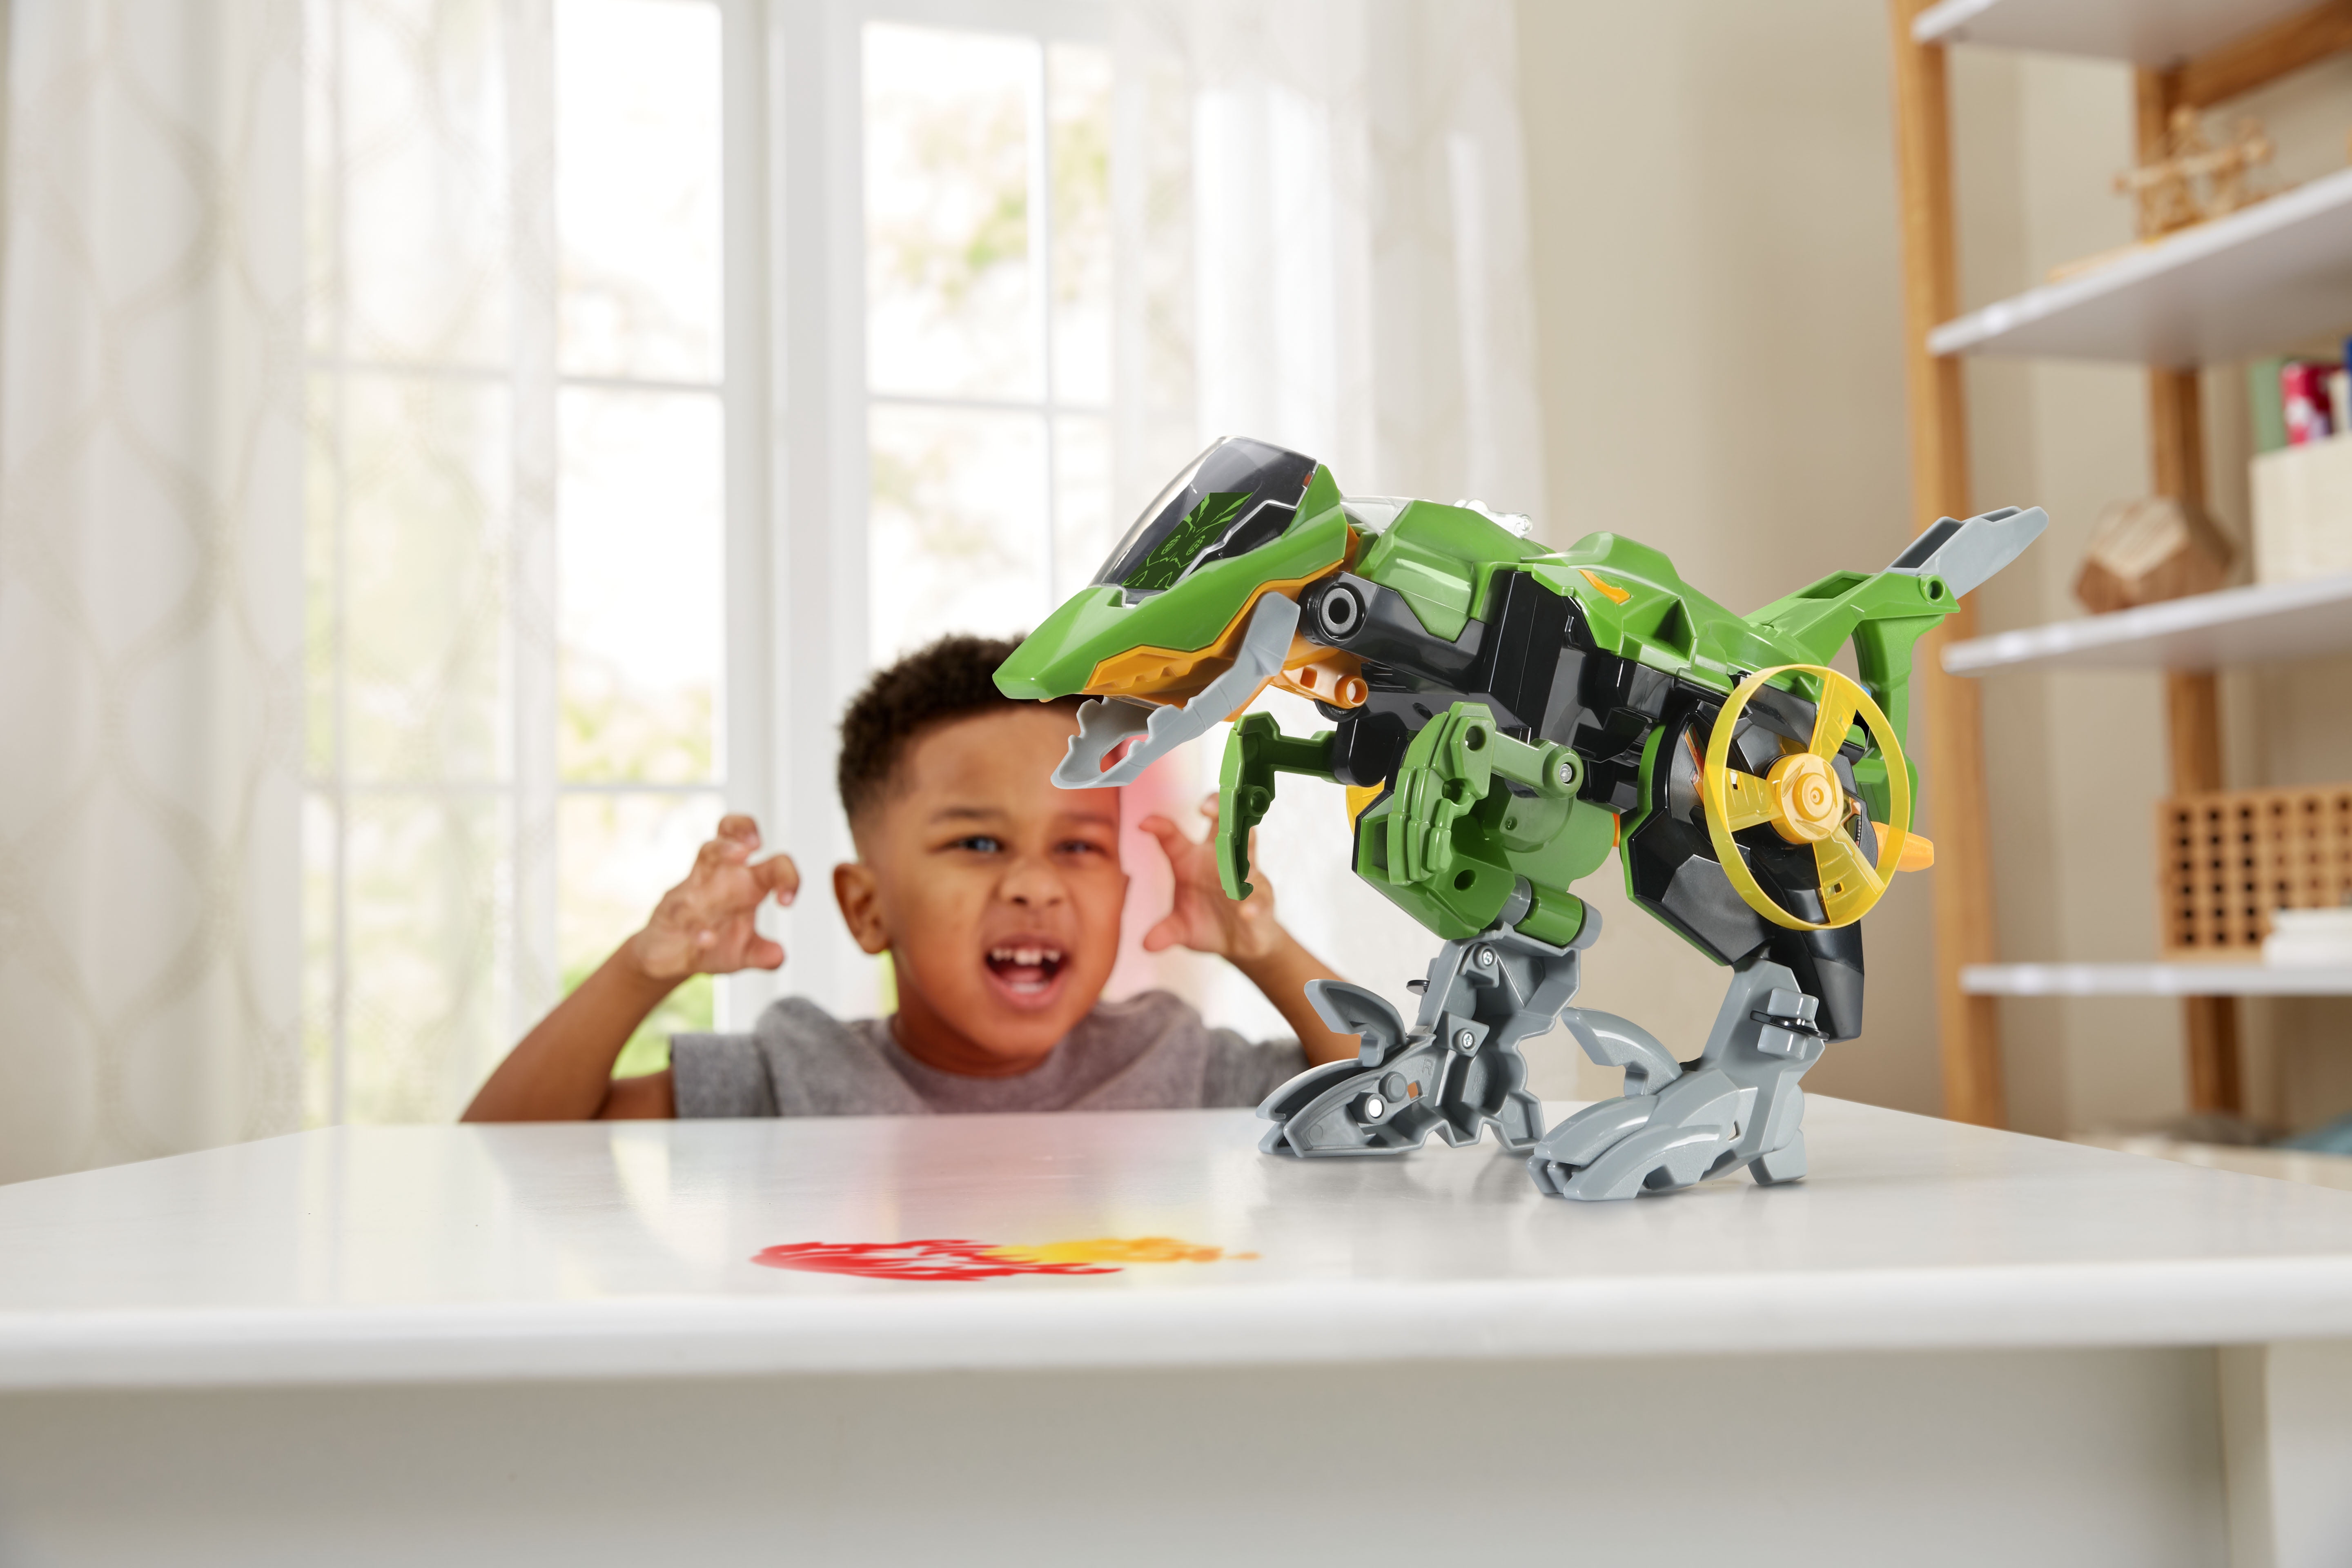 VTech Switch and Go Dinos, Blister The Velociraptor, 3-8 years